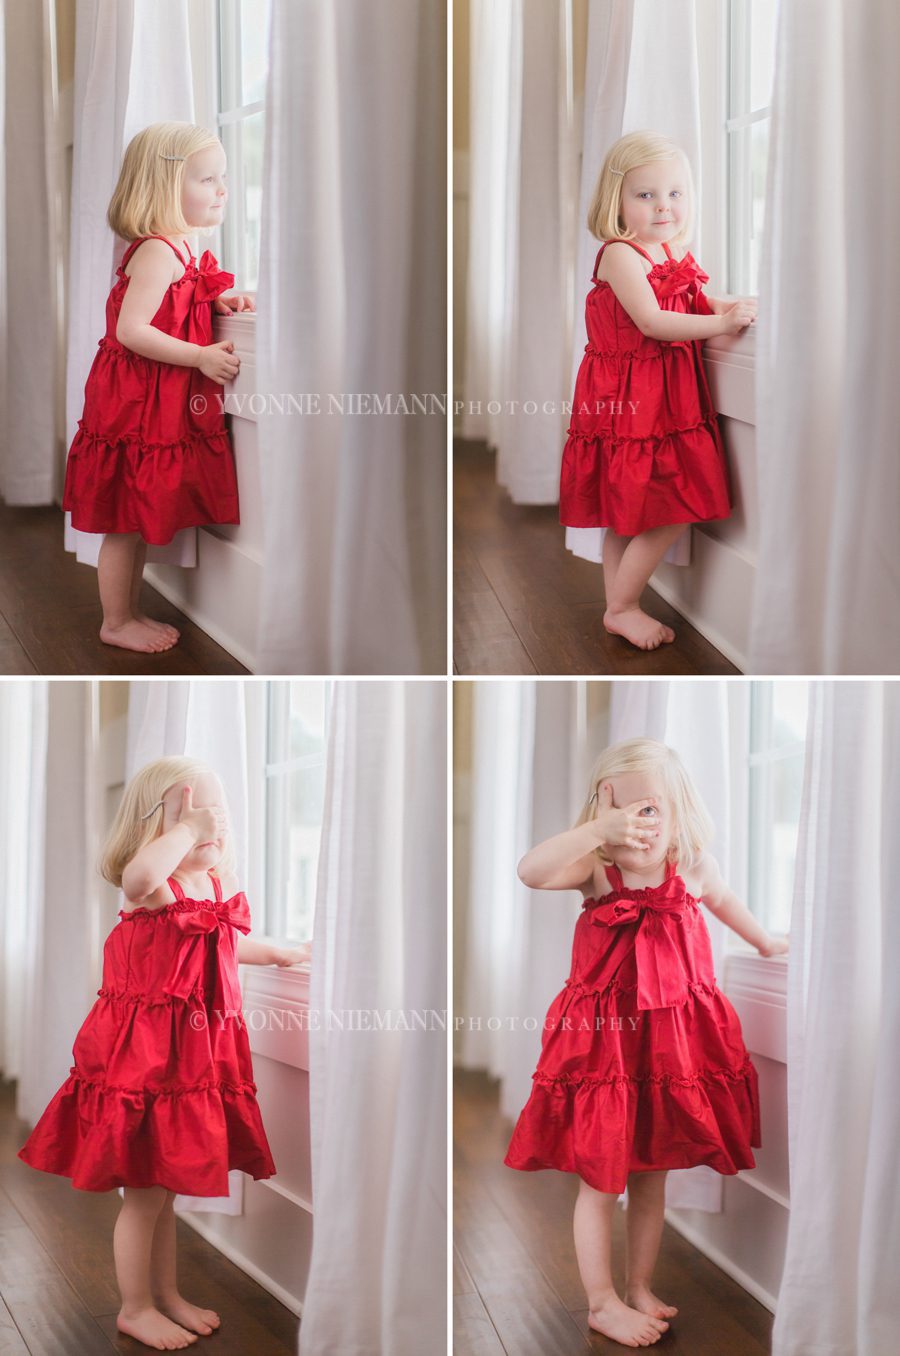 Organic children's photography of a two year old little girl in a red dress looking out her window in Bishop, GA.